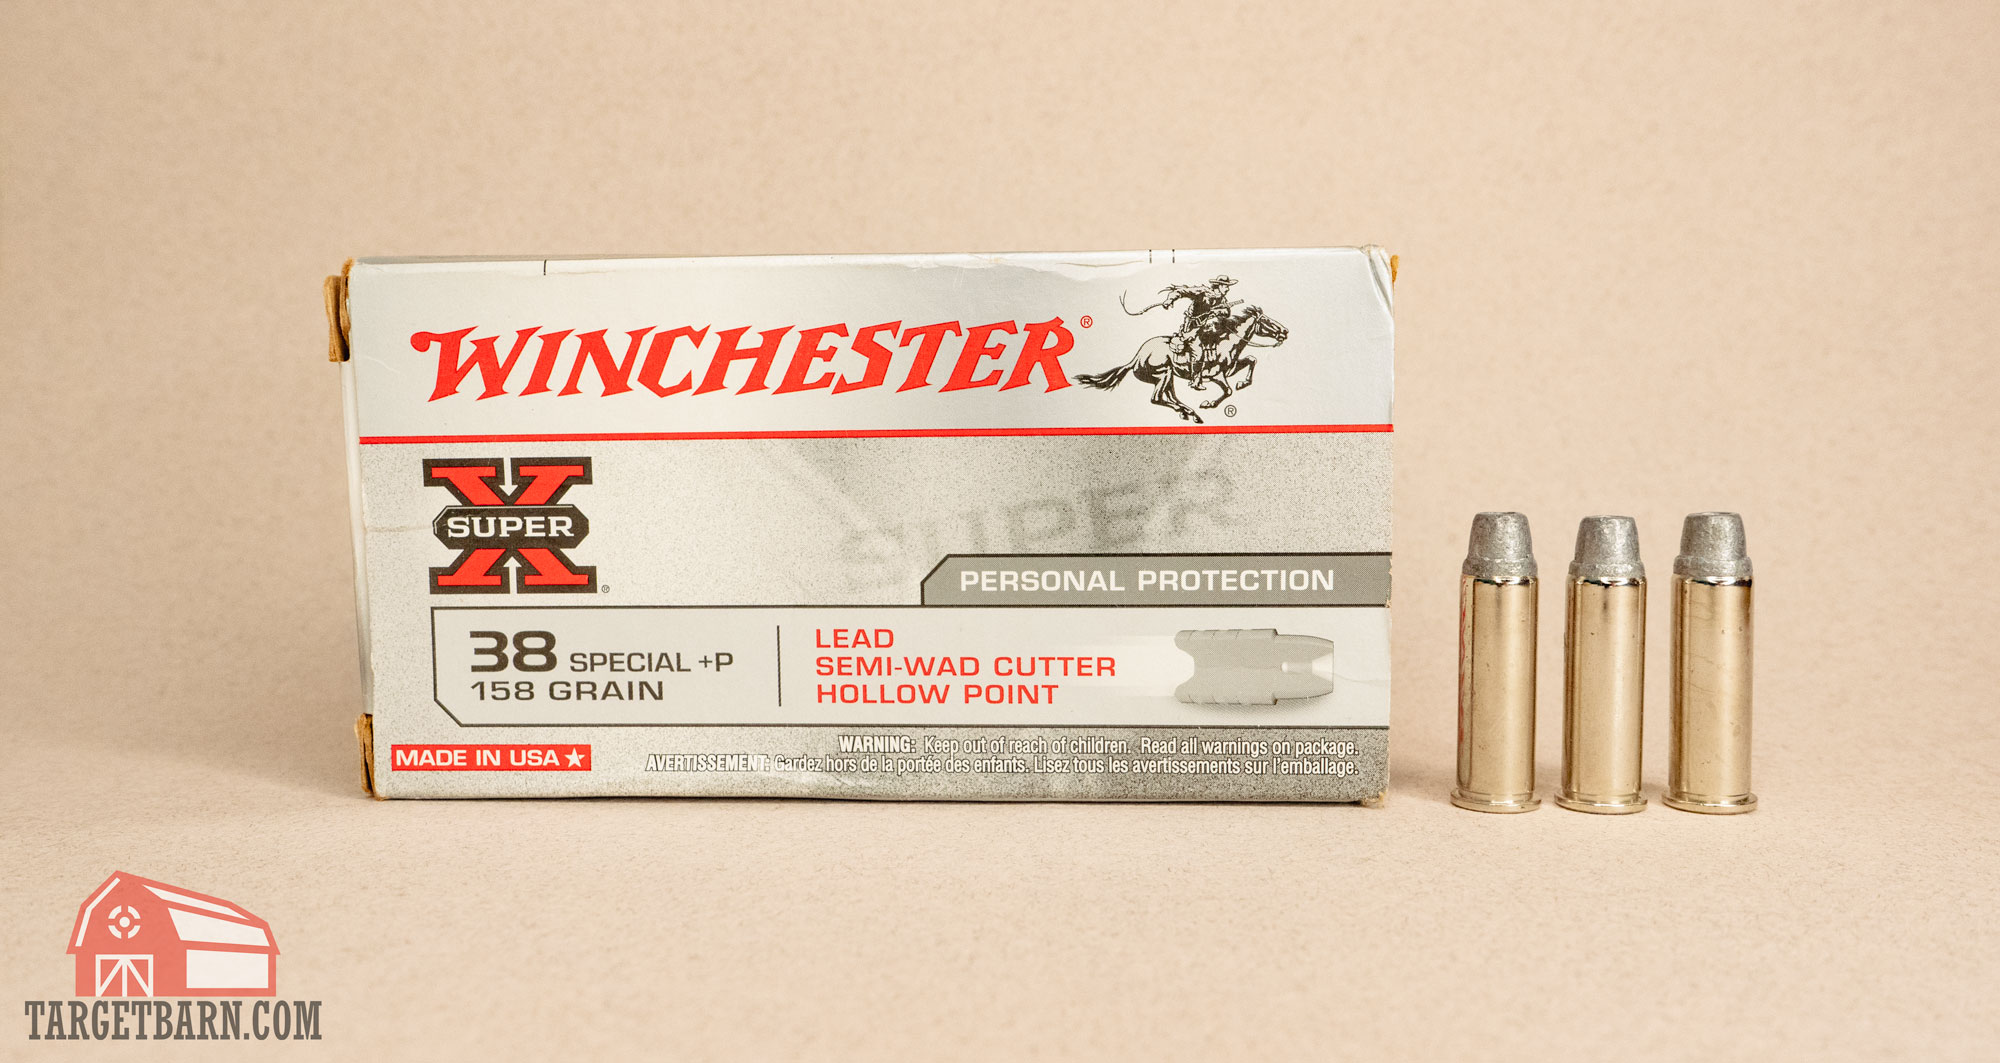 a box and three rounds of winchester 38 special semi-wad cutter hollow point